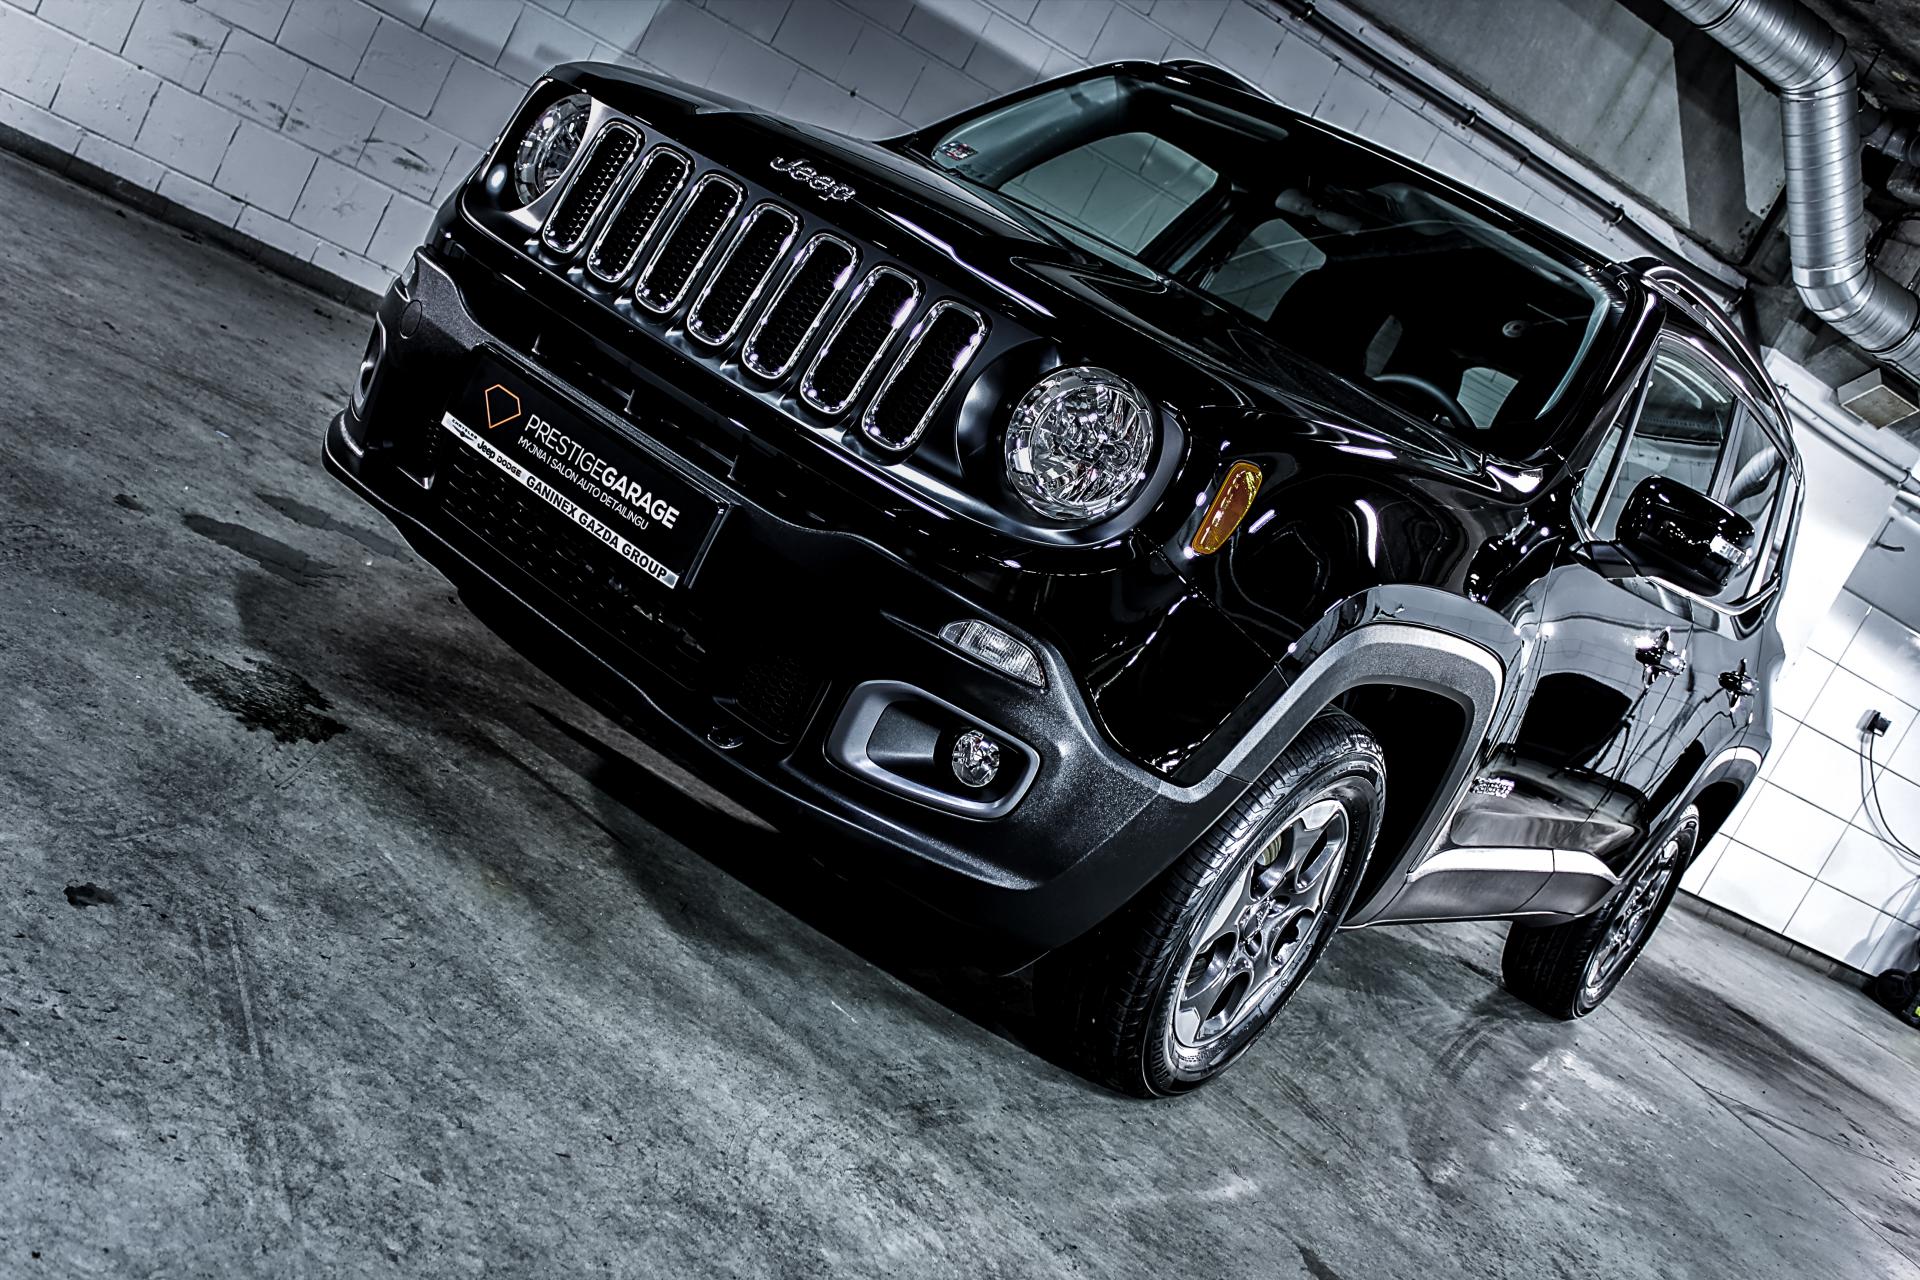 Jeep Renegade grill